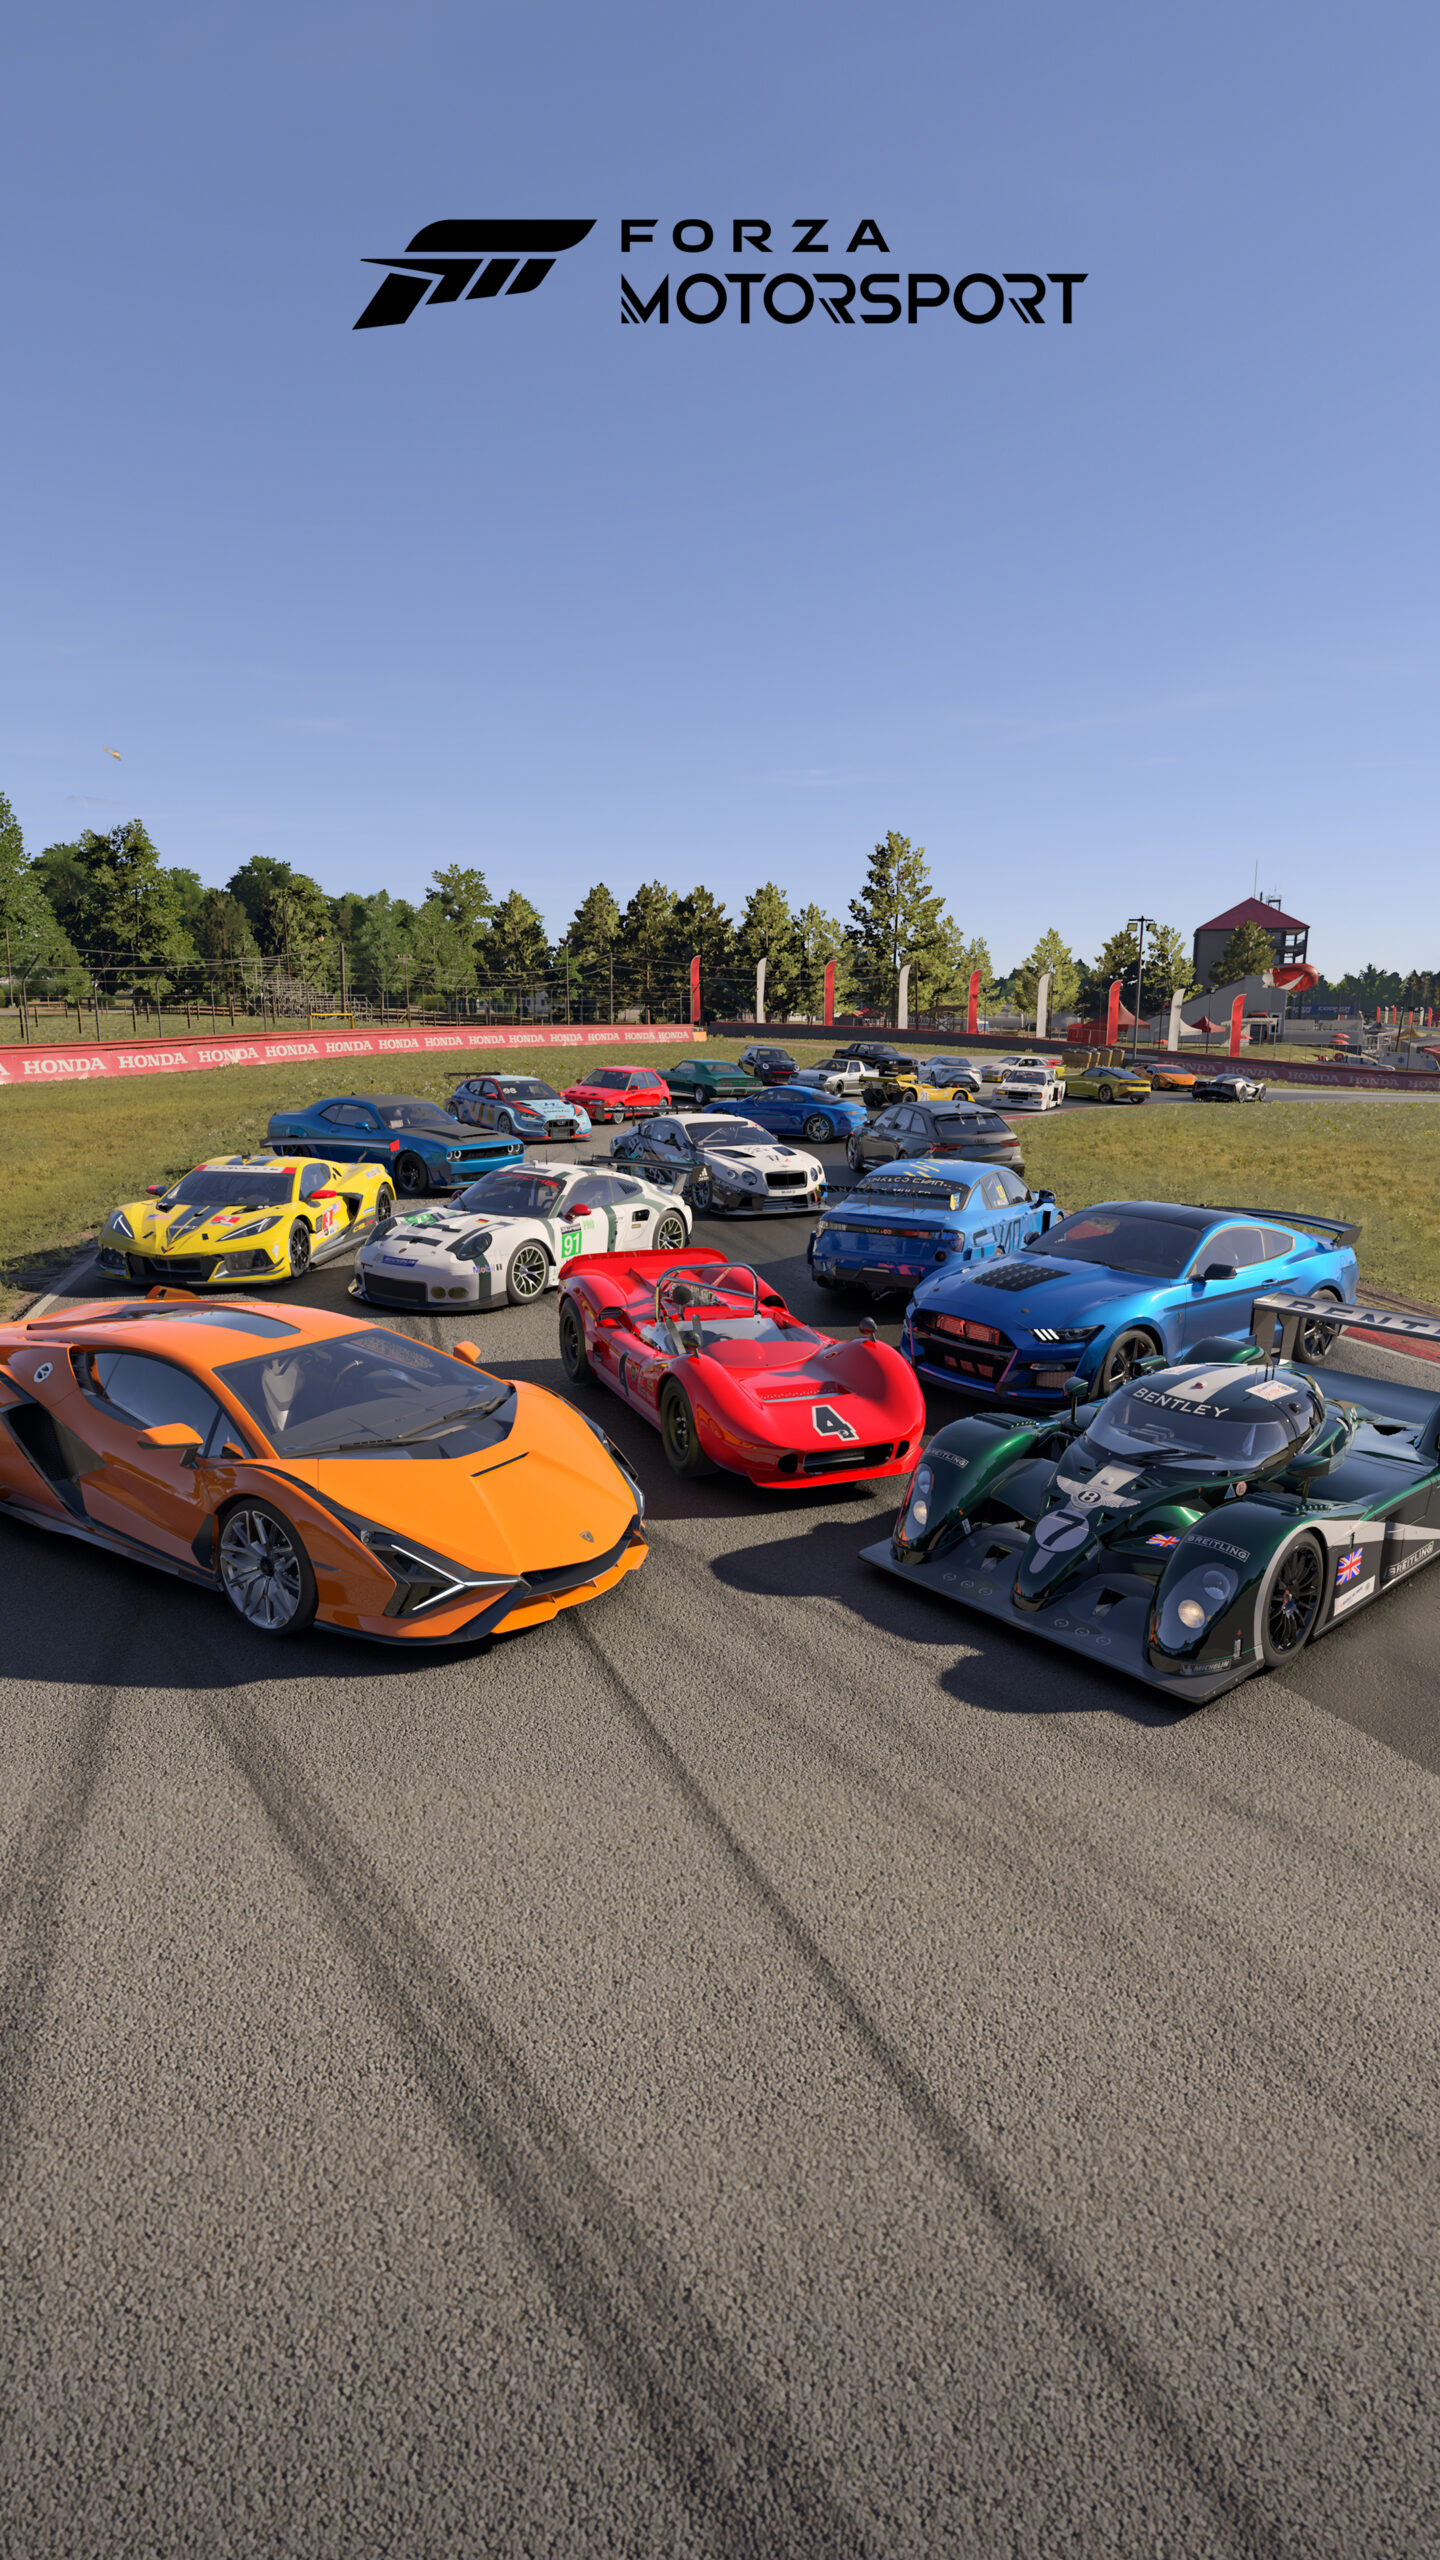 Will this be the last Forza Motorsport ever?